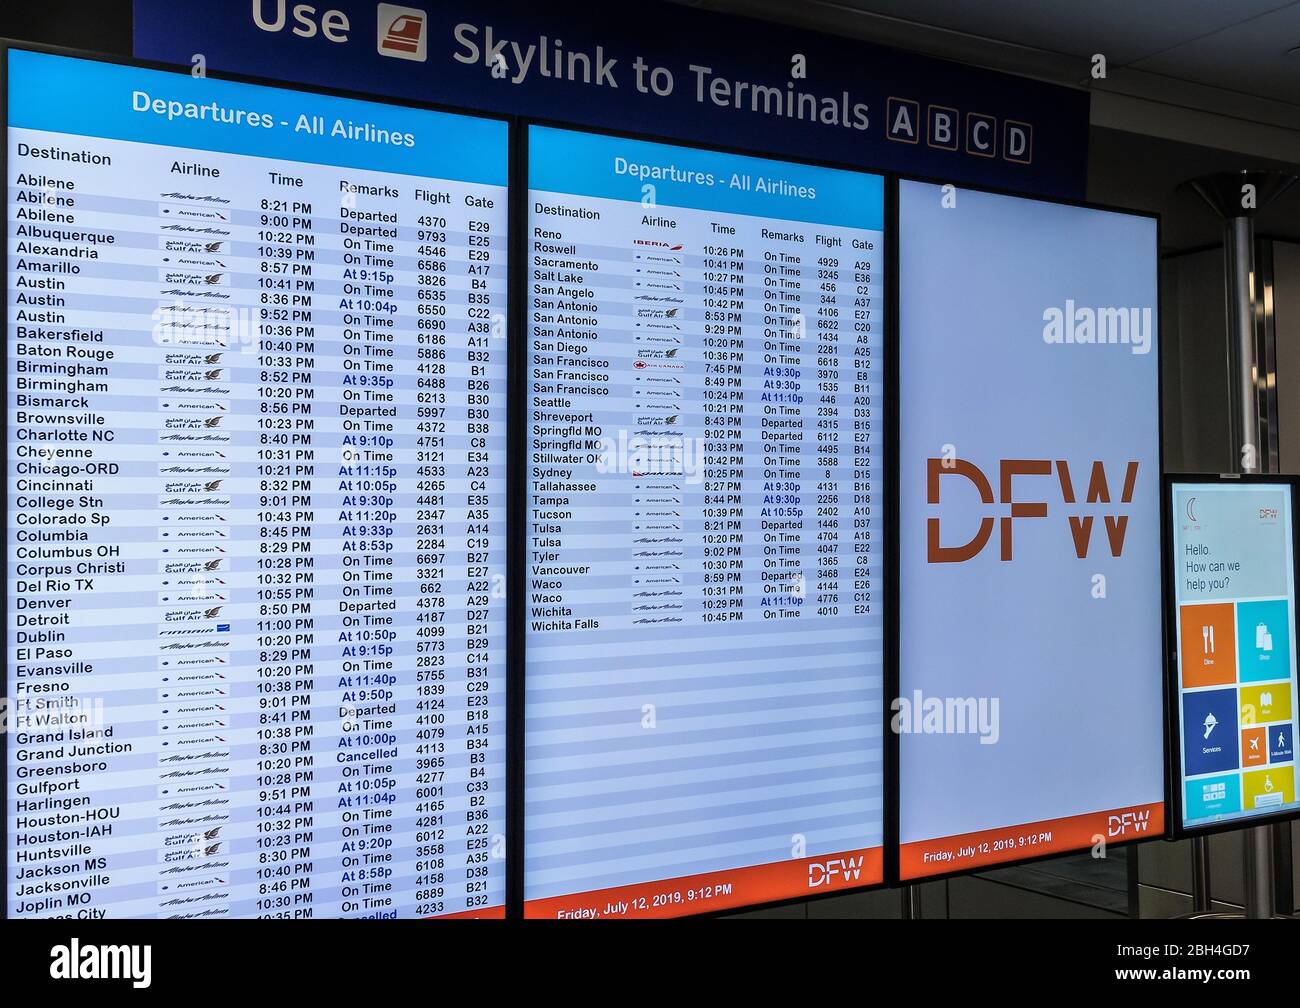 Arrival and departure, departures board at DFW, Dallas - Fort Worth International Airport, Texas, USA. Stock Photo